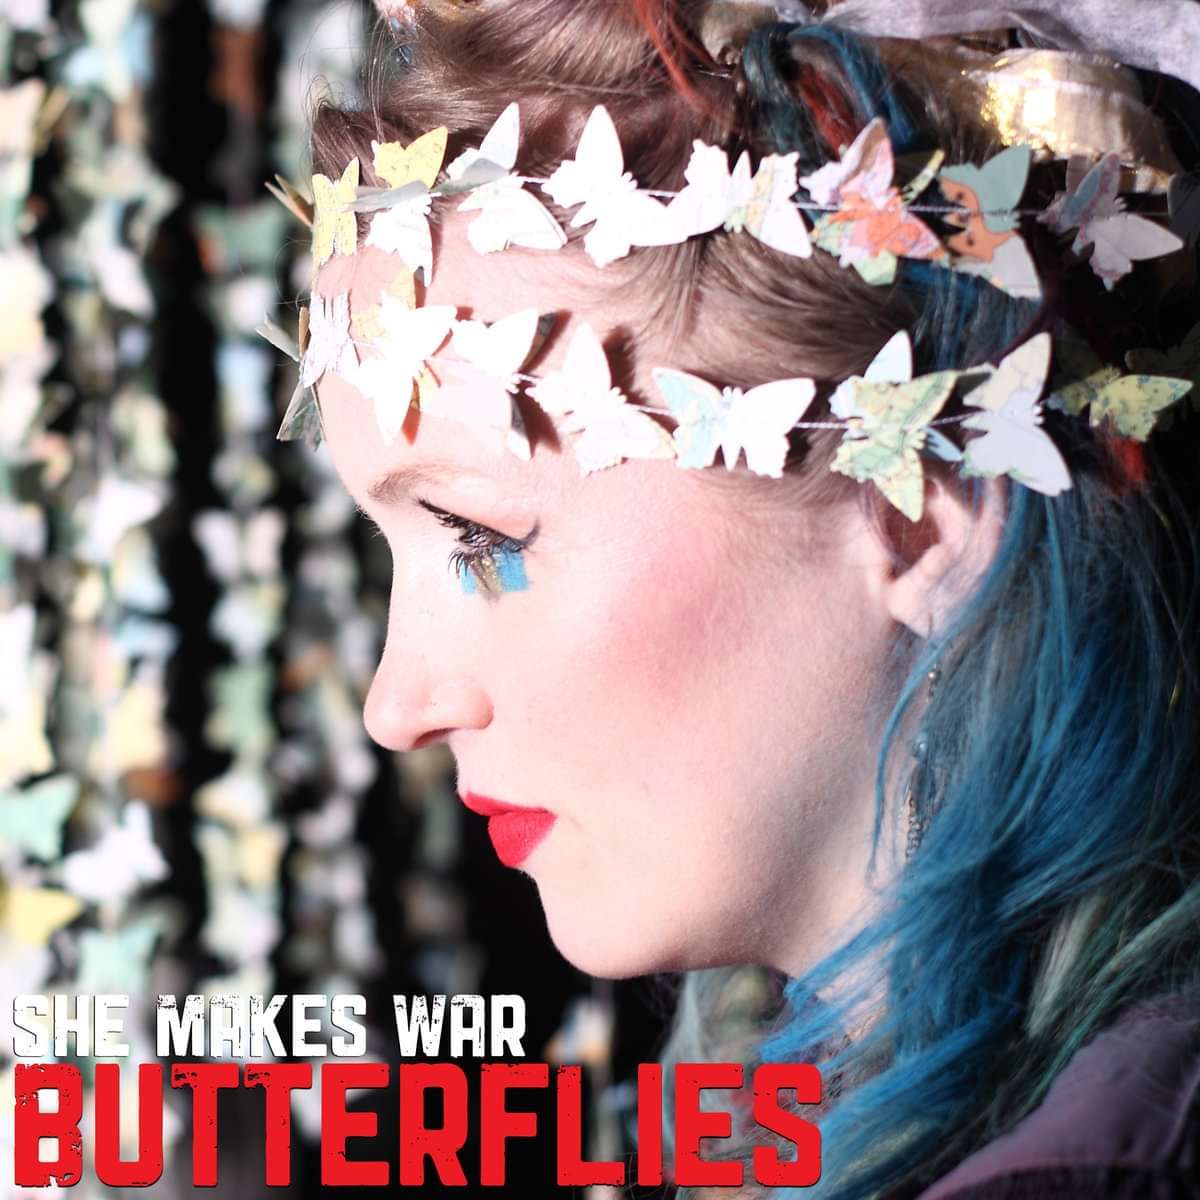 The Butterflies Audiovisual EP - CD and free download - She Makes War